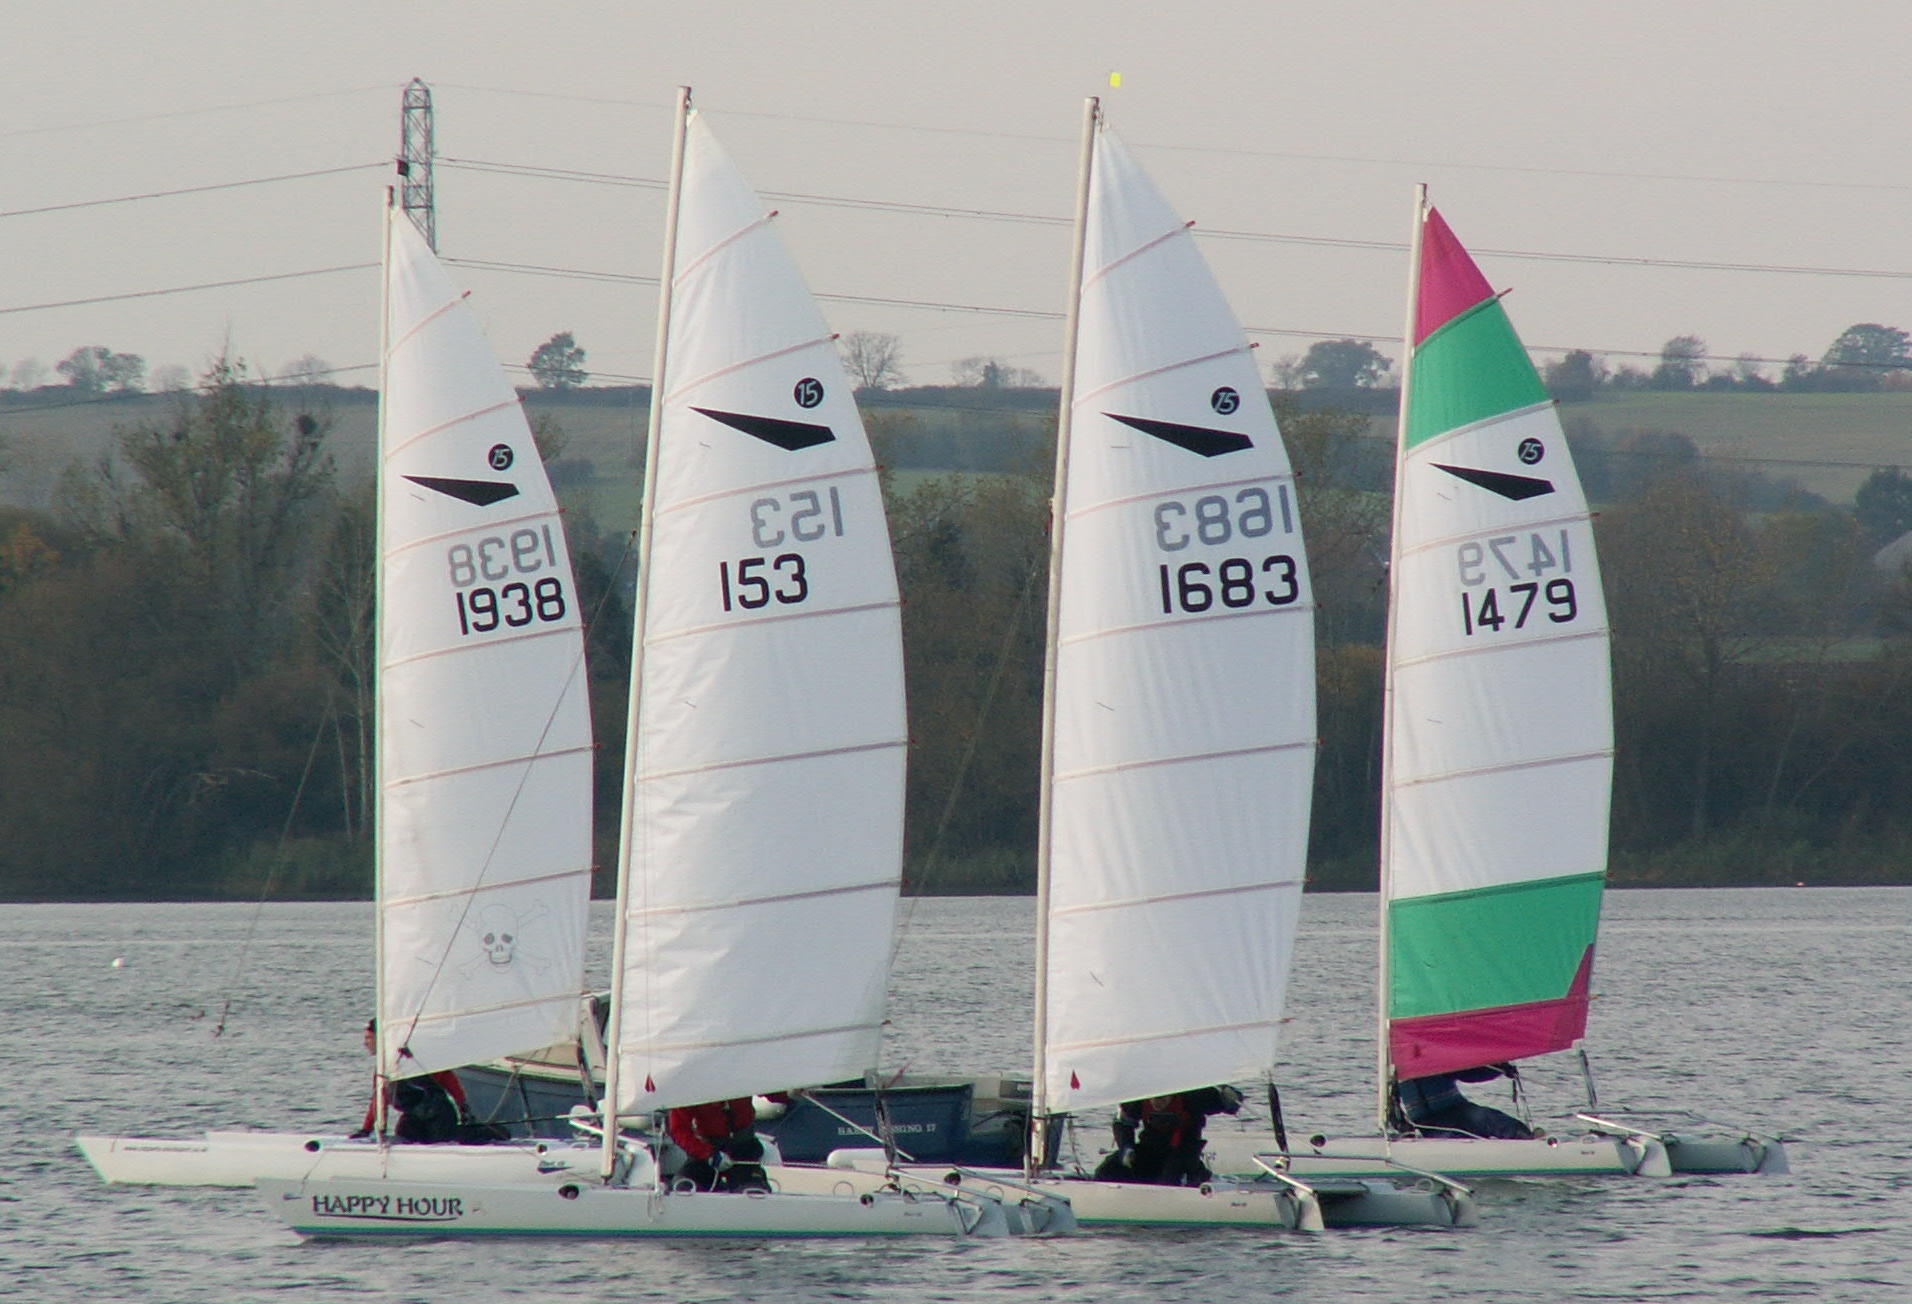 Close Sailing in Light Winds (Pictures by Bob Carter)